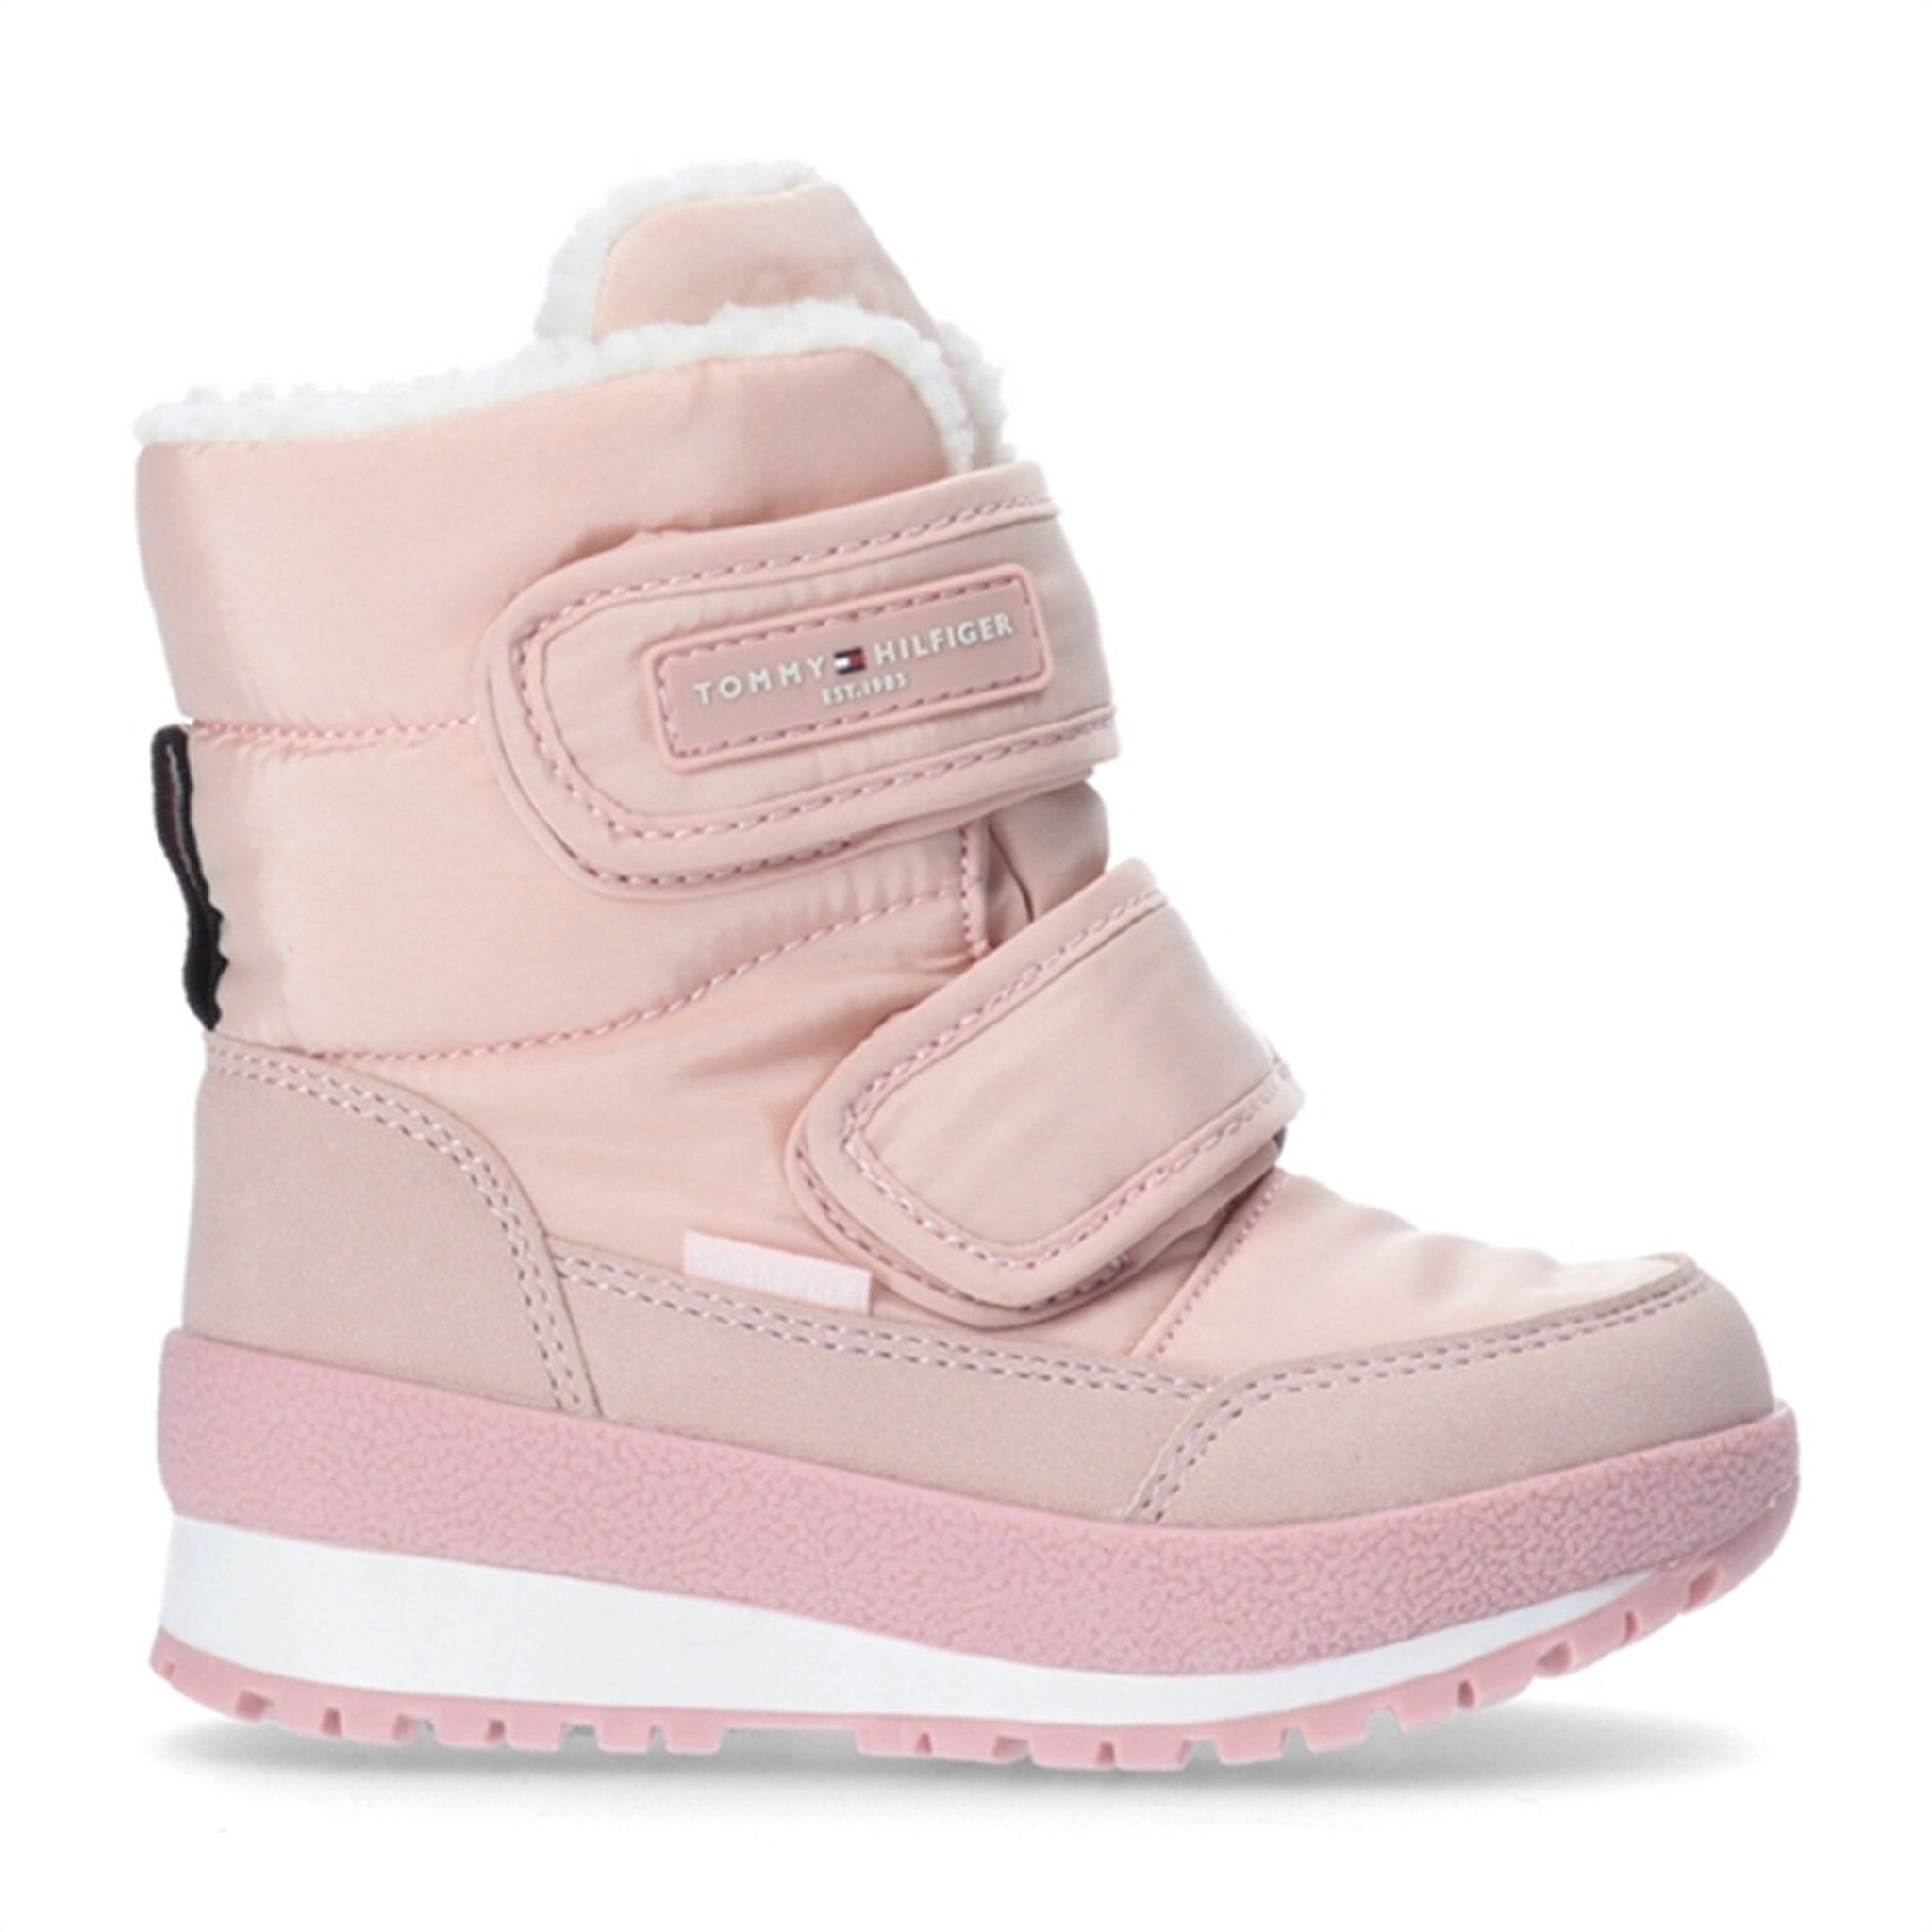 Tommy Hilfiger Snow Boot Pink 4